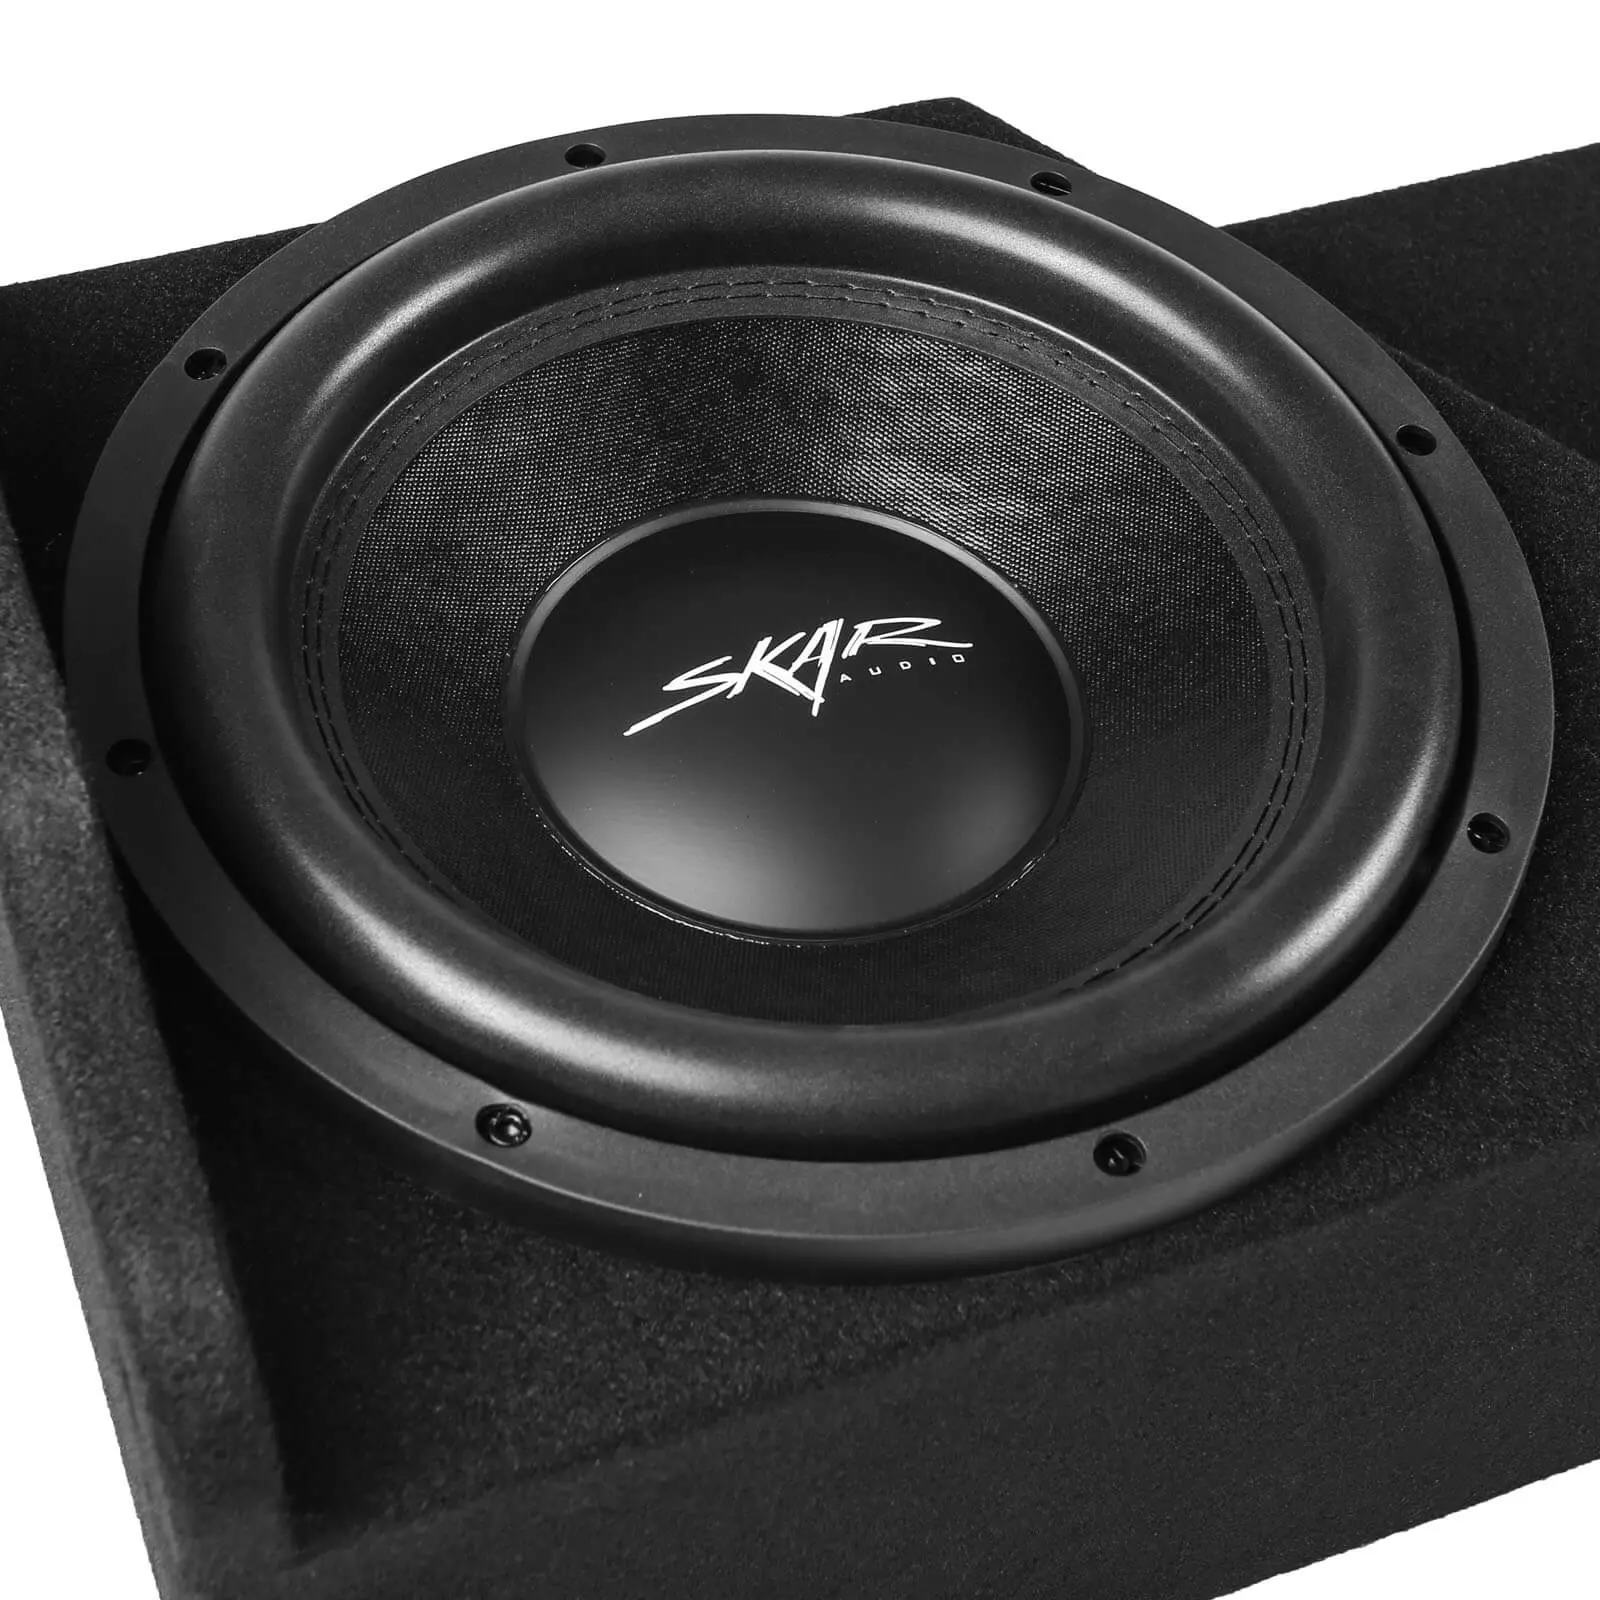 Dual 12" 1,600W Max Power Loaded Subwoofer Enclosure Compatible with 2014-2018 Chevy Silverado & GMC Sierra Double Cab Trucks #6